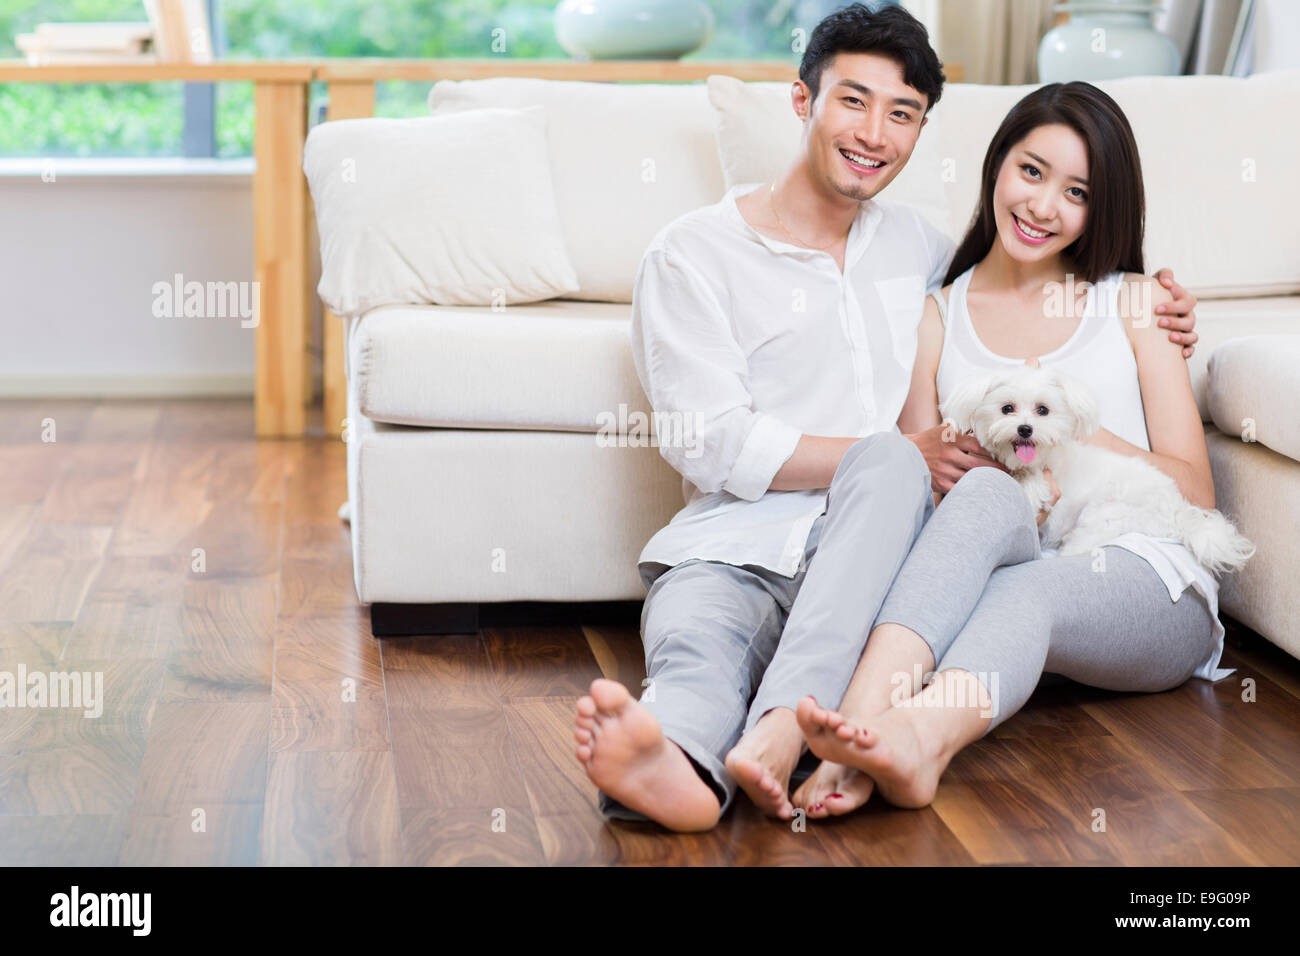 Cheerful young couple and a cute dog Stock Photo